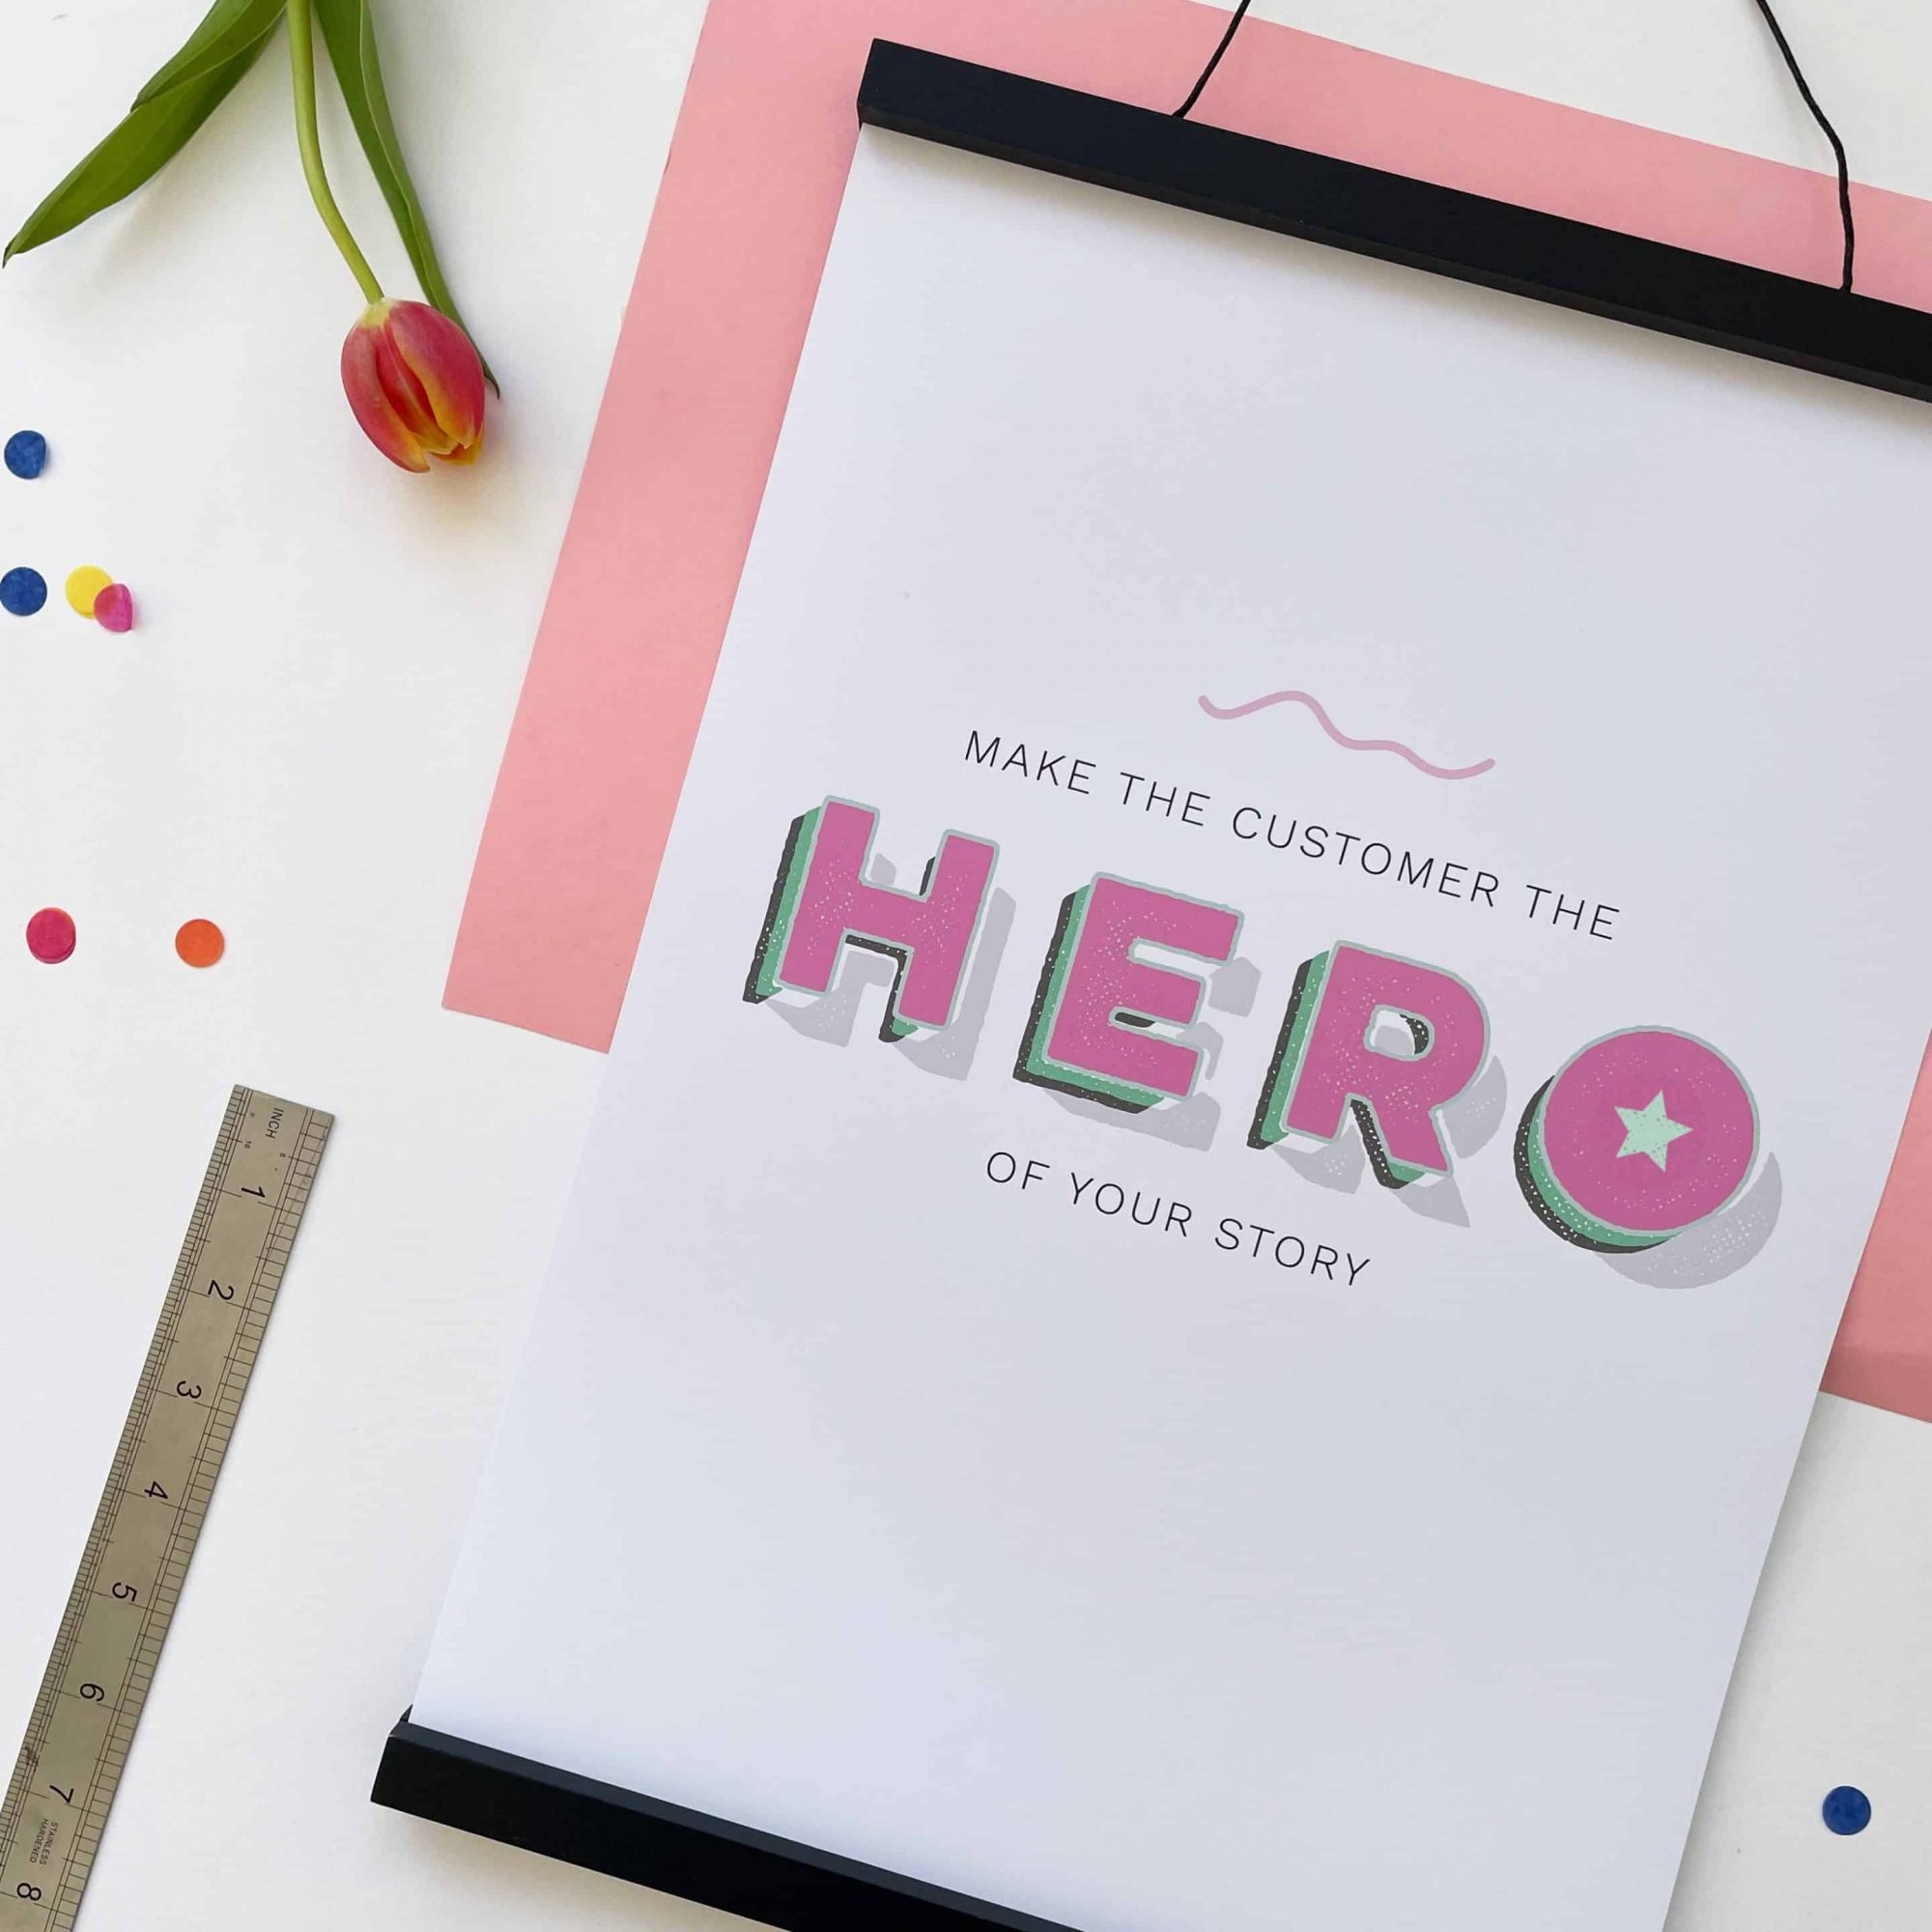 Make the customer the hero of your story